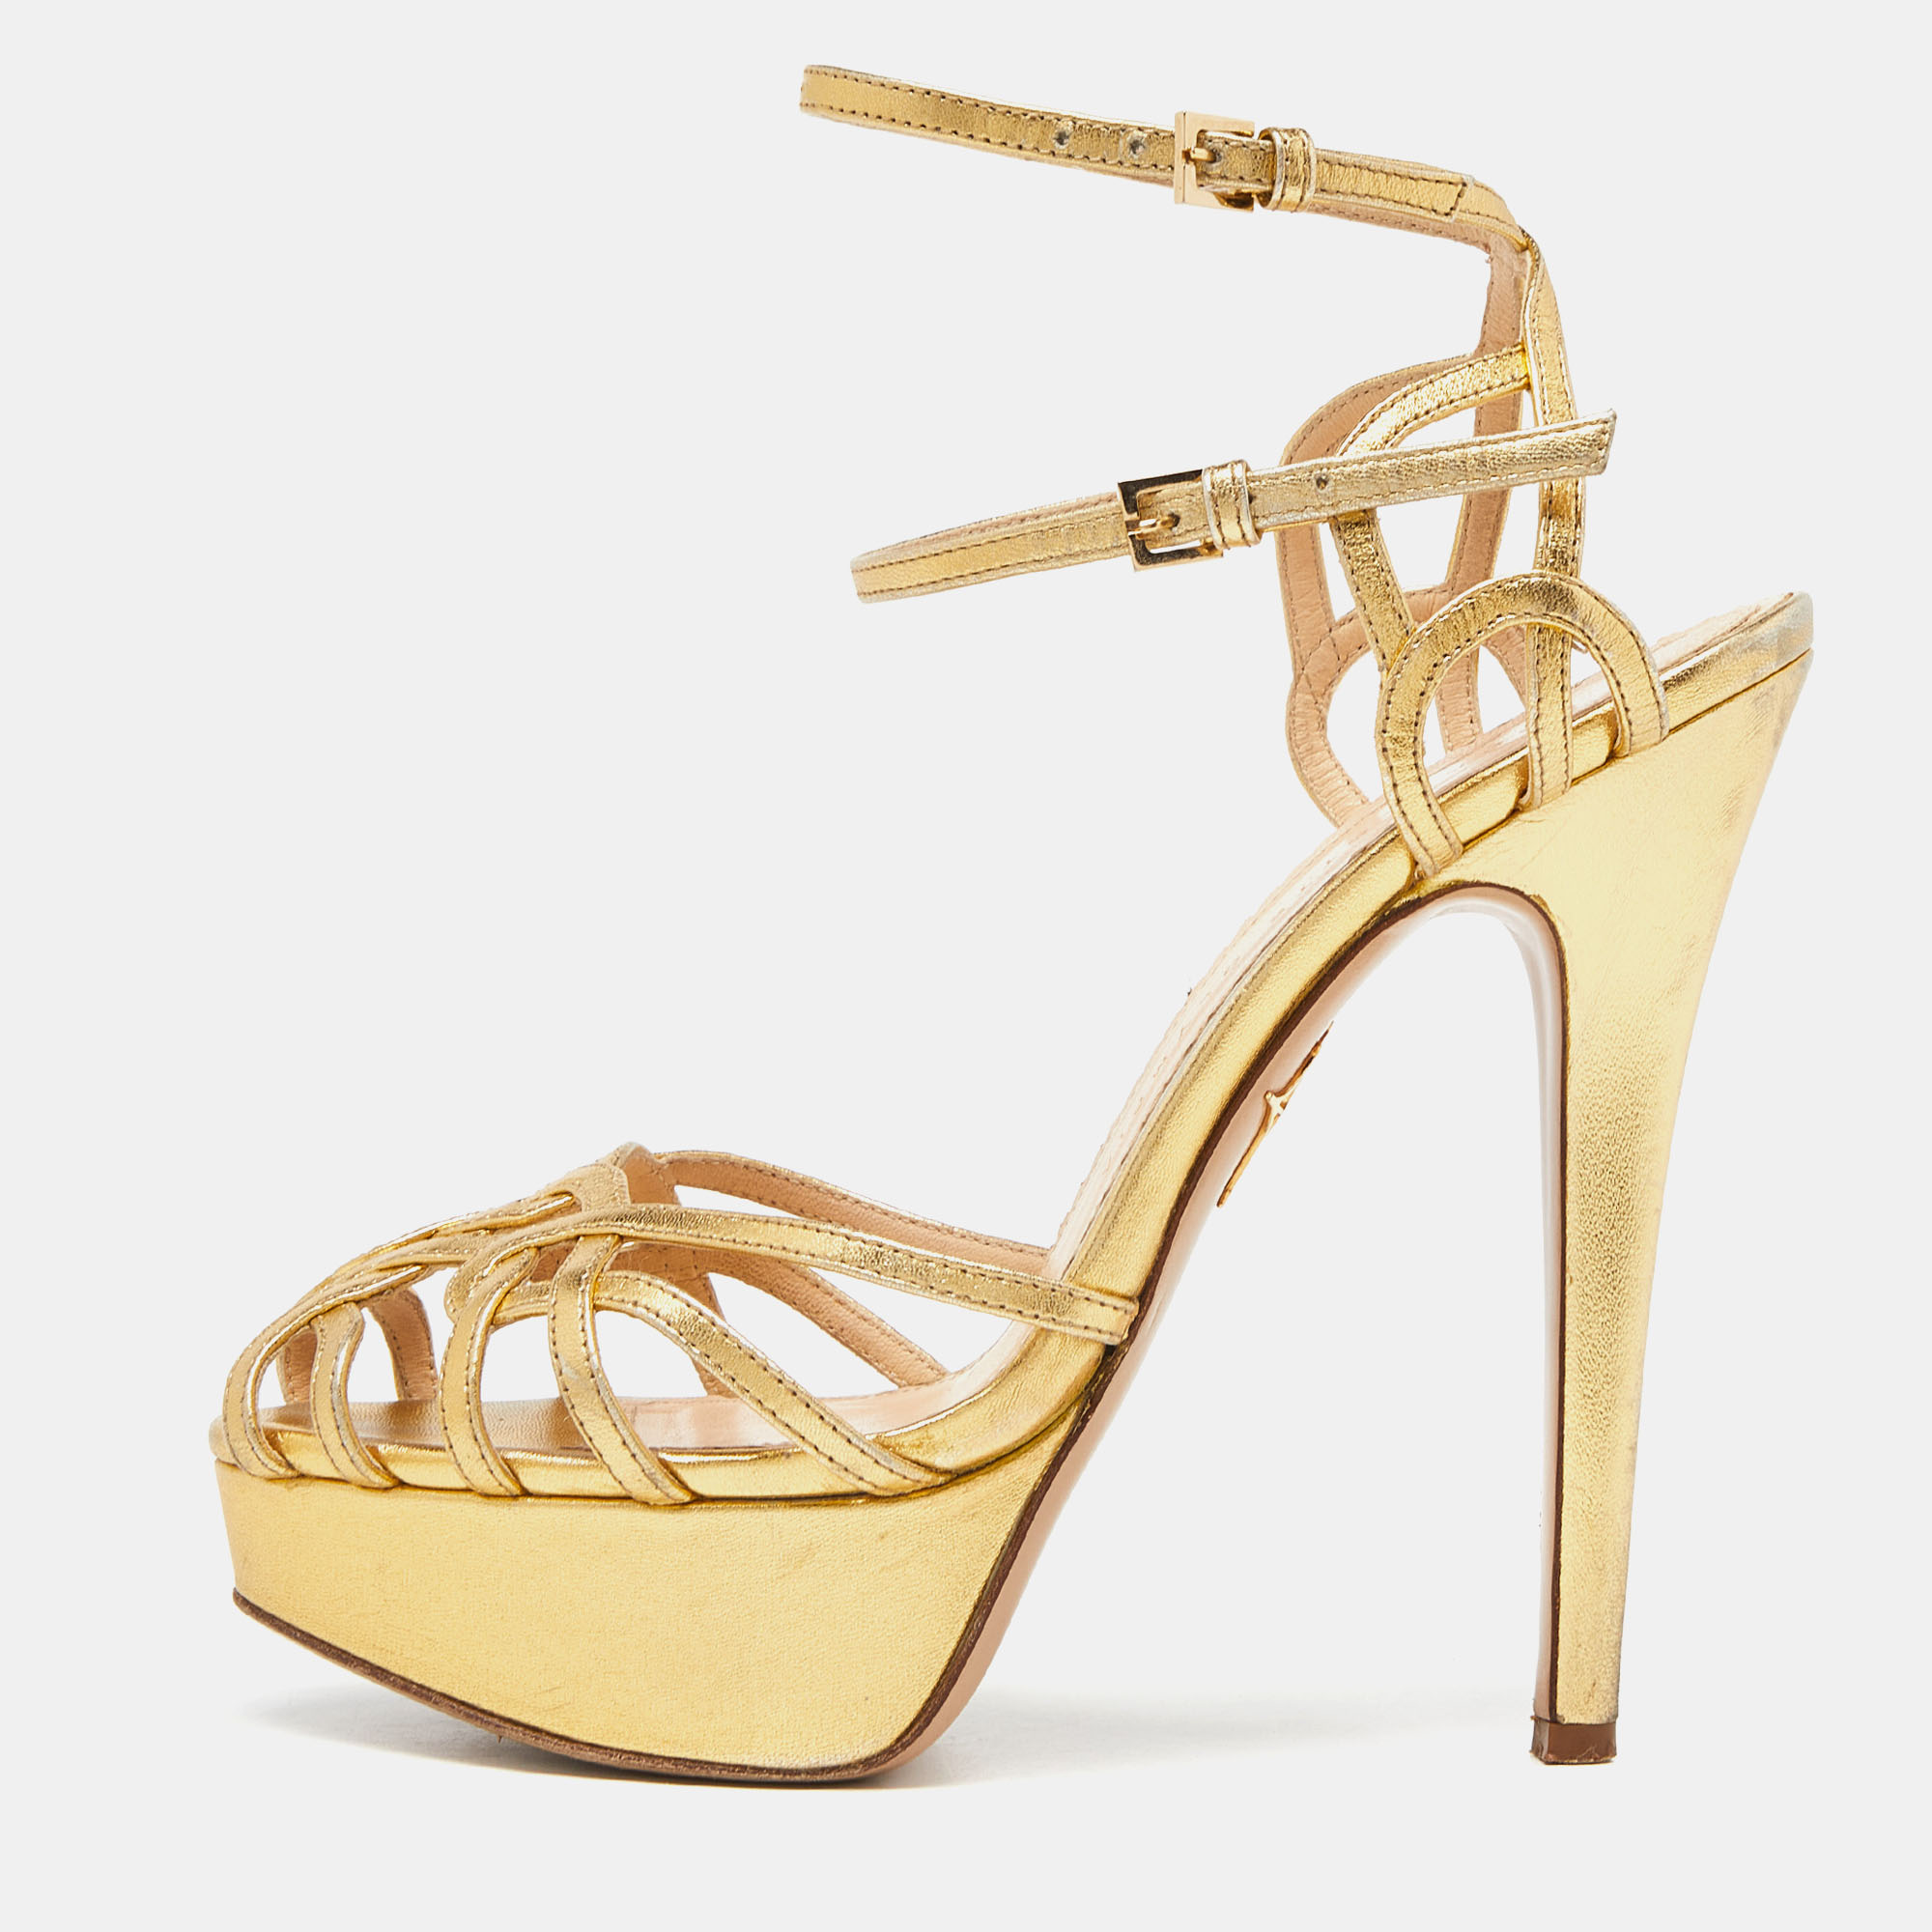 Pre-owned Charlotte Olympia Gold Leather Strappy Platform Sandals Size 37.5